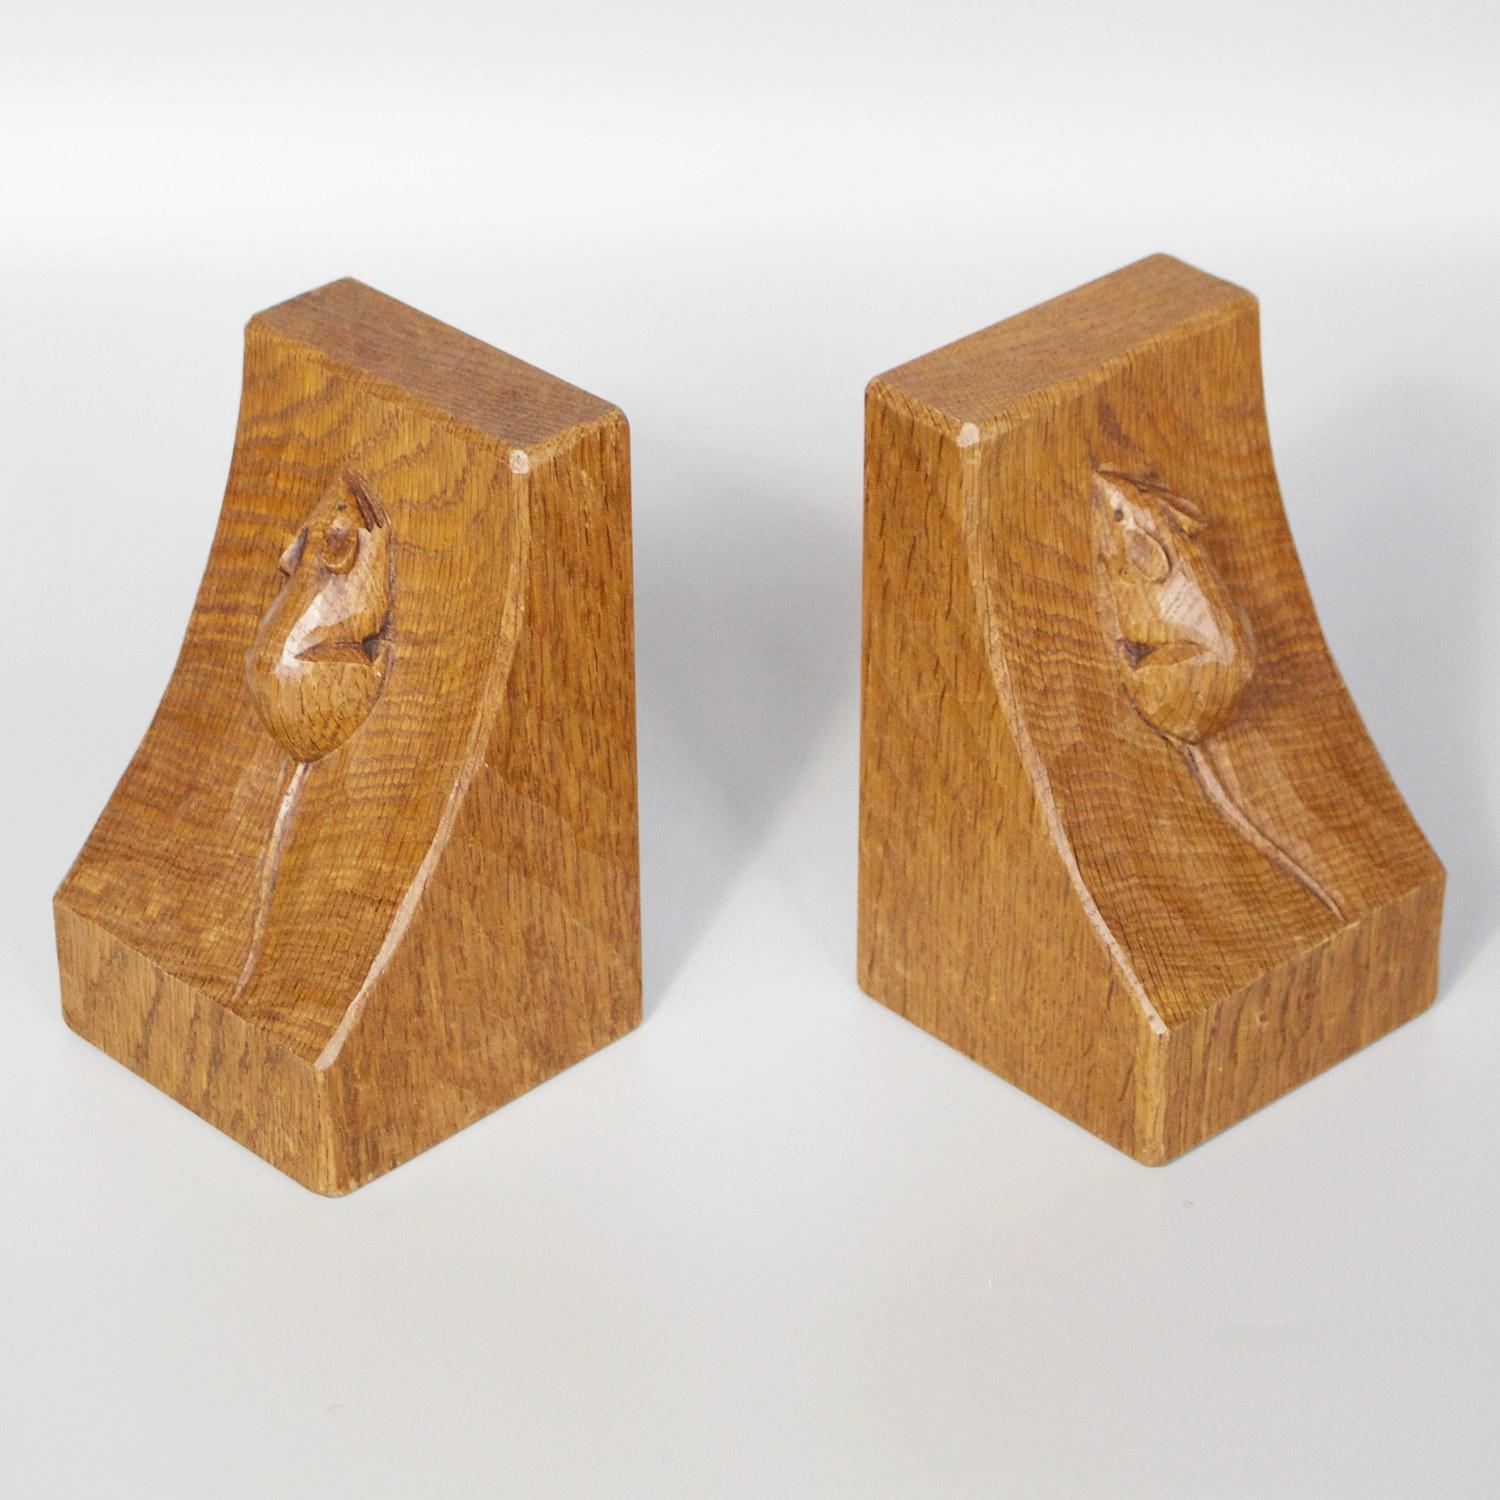 Pair of bookends by Robert 'Mouseman' Thompson. Carved and adzed oak with a climbing mouse on each bookend. 

Dimensions: H 9cm W 15cm D 9cm

Origin: English

Date: Circa 1950

Item Number: 2101212